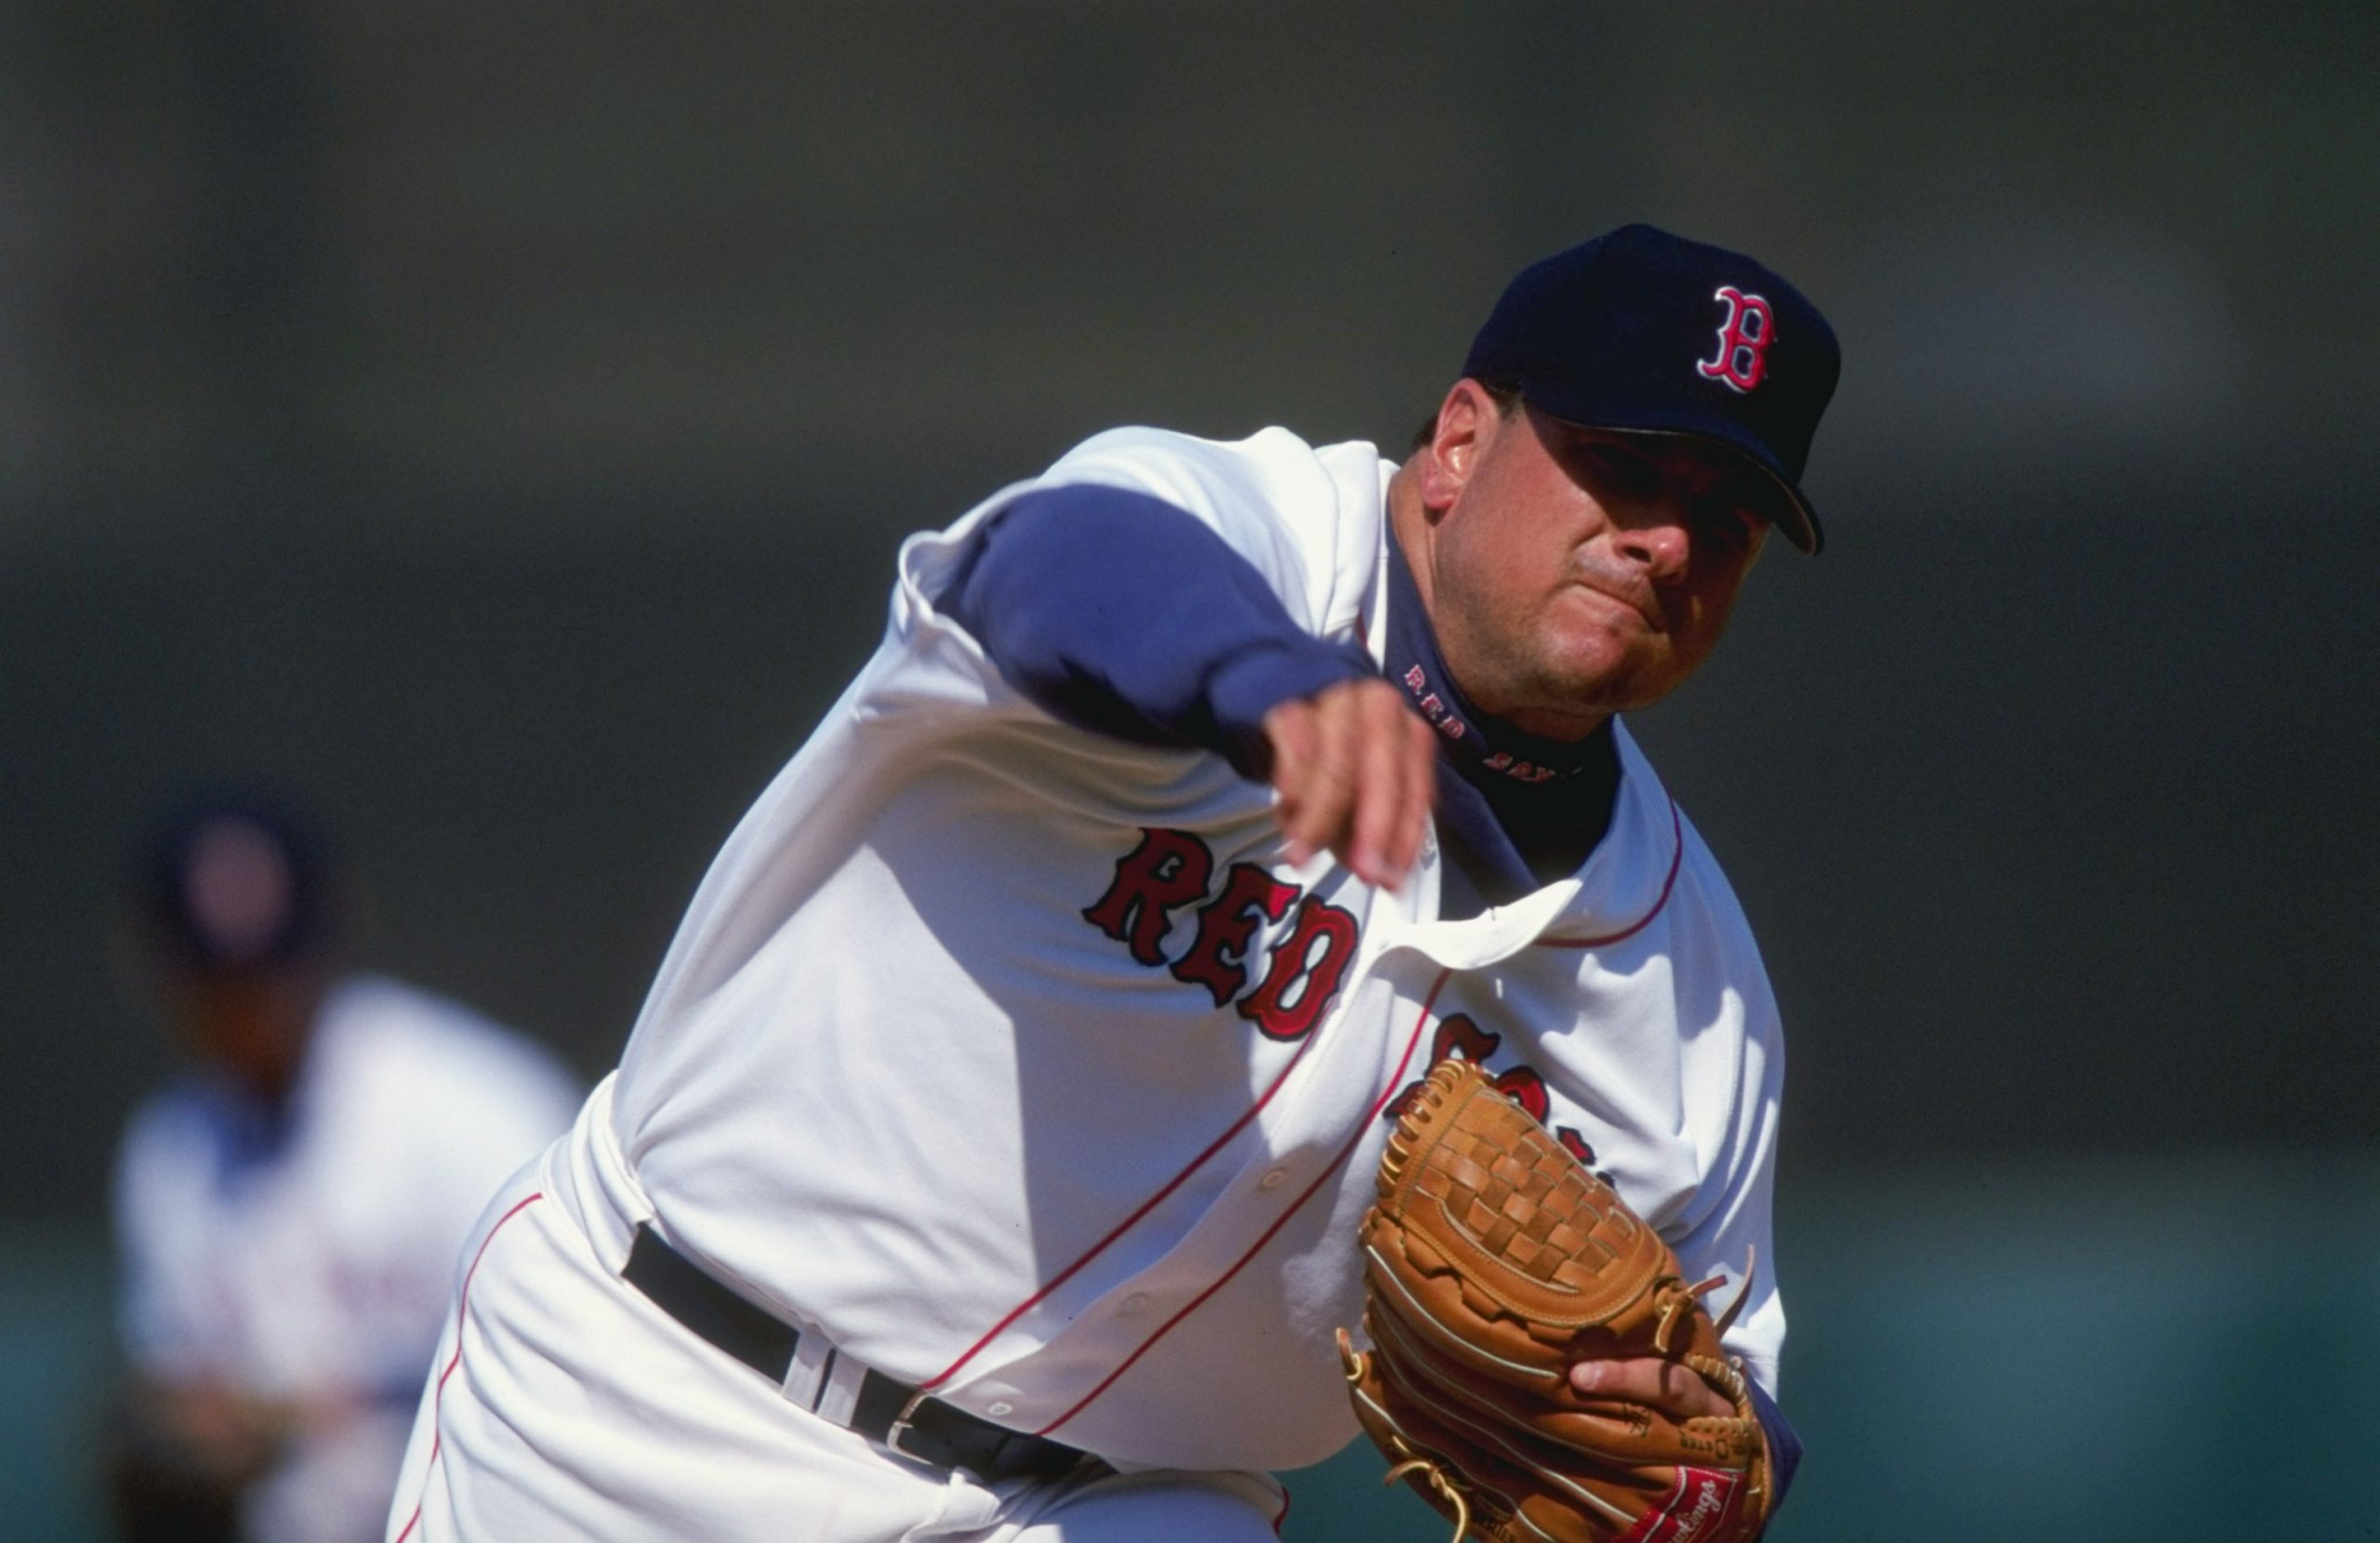 Jim Corsi of the Boston Red Sox delivers a pitch.